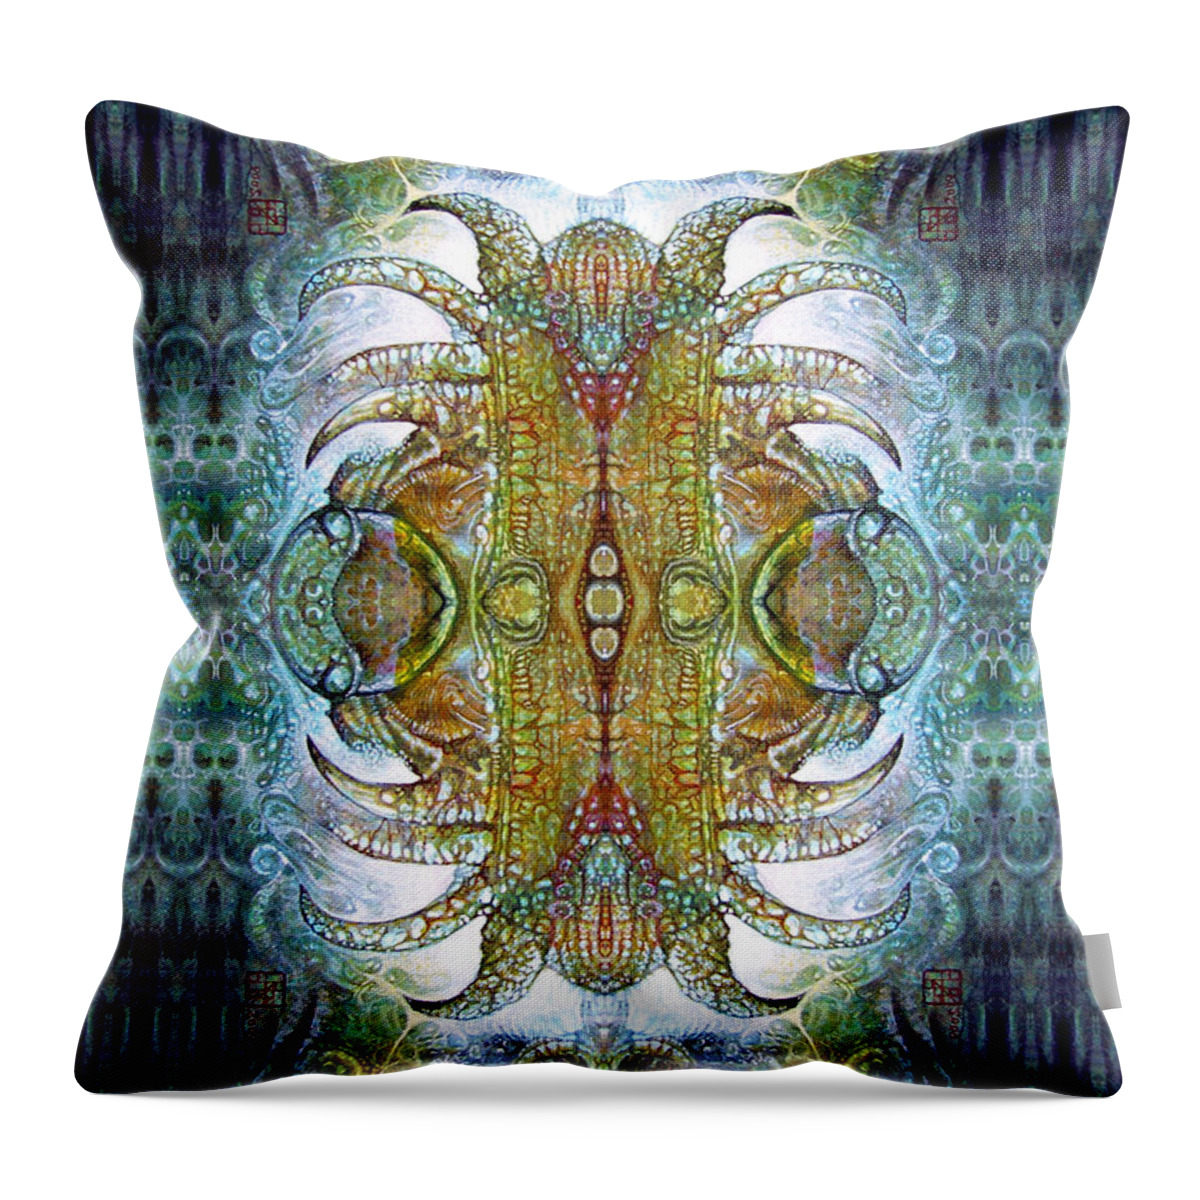 bogomil Variations Throw Pillow featuring the digital art Bogomil Variation 14 - Otto Rapp and Michael Wolik by Otto Rapp